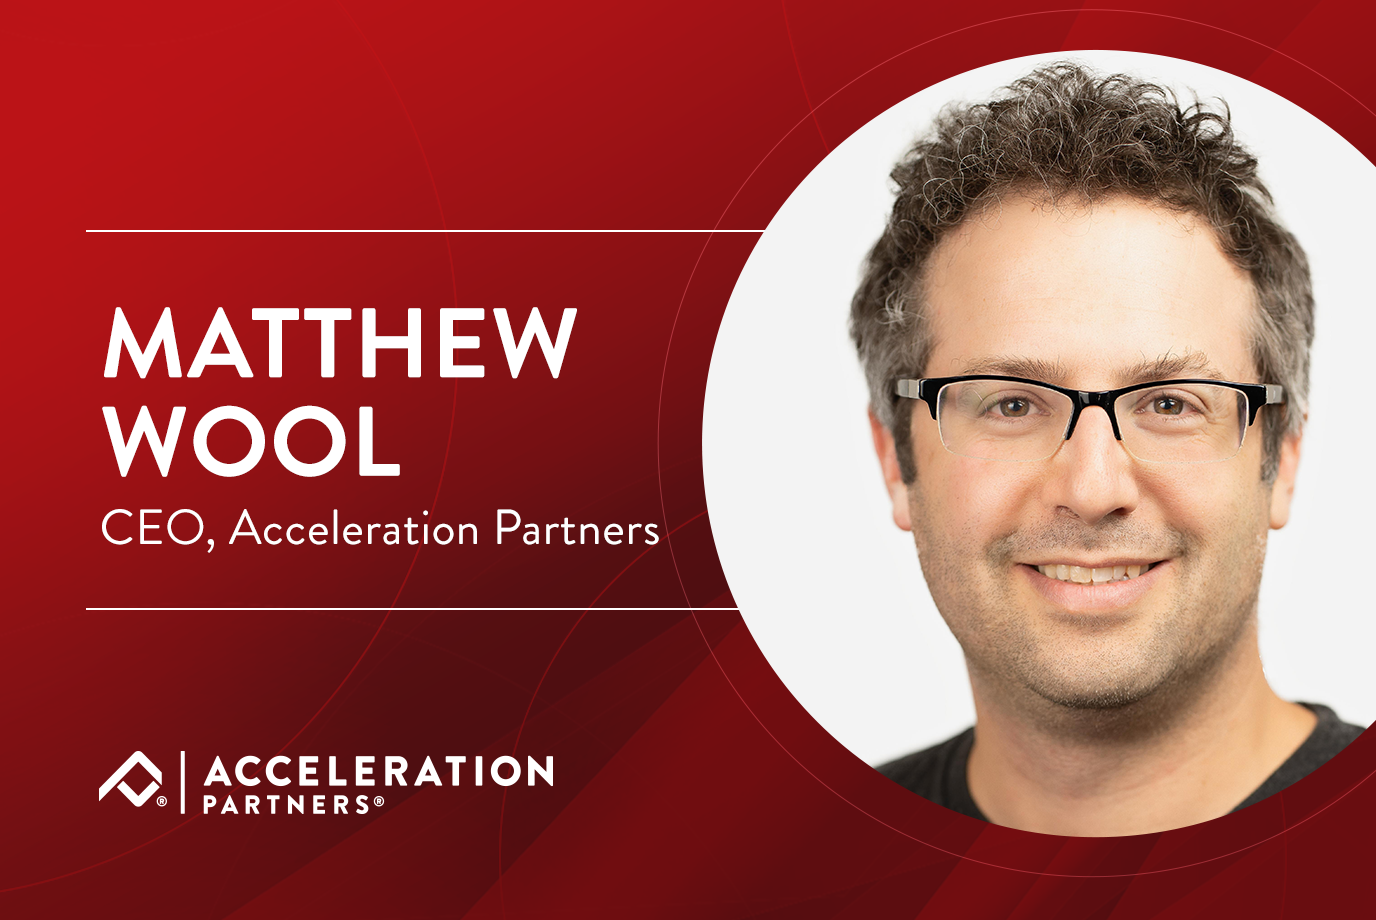 Introducing Acceleration Partners' New CEO